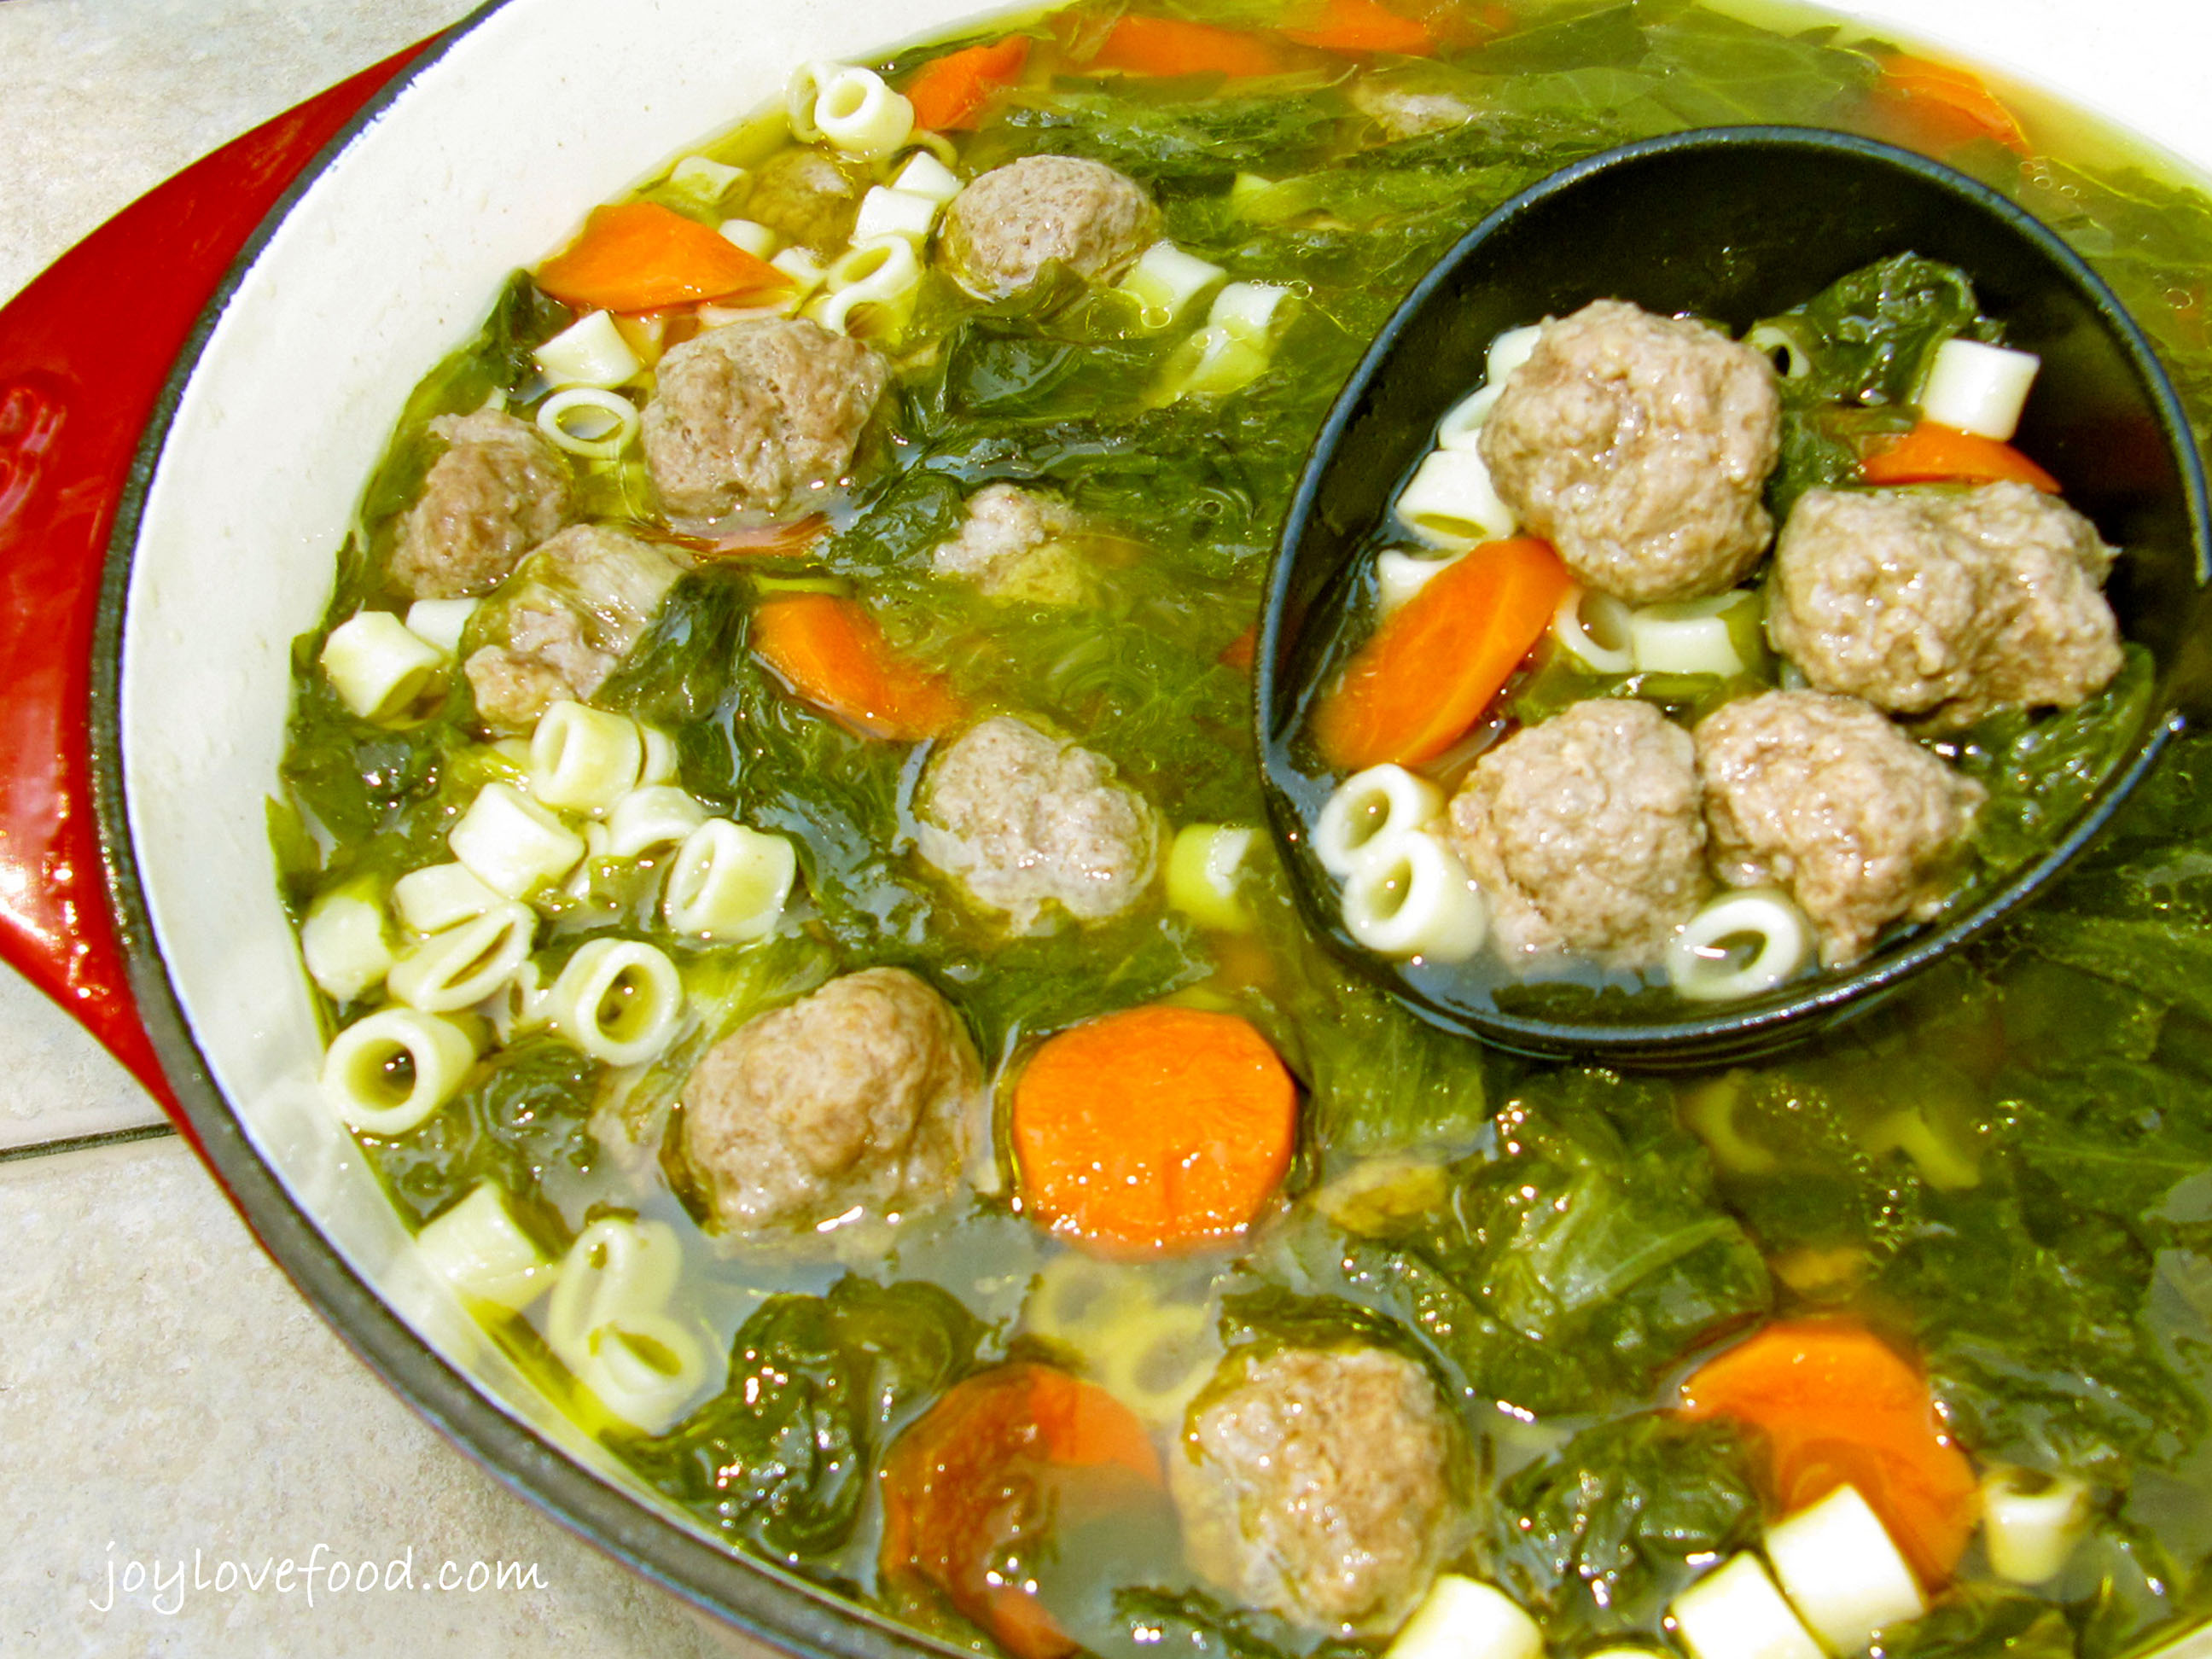 Meatball Soup - Kids and grown-ups alike will both love this yummy hearty soup chock full of little meatballs, bite sized pasta, carrots and escarole.